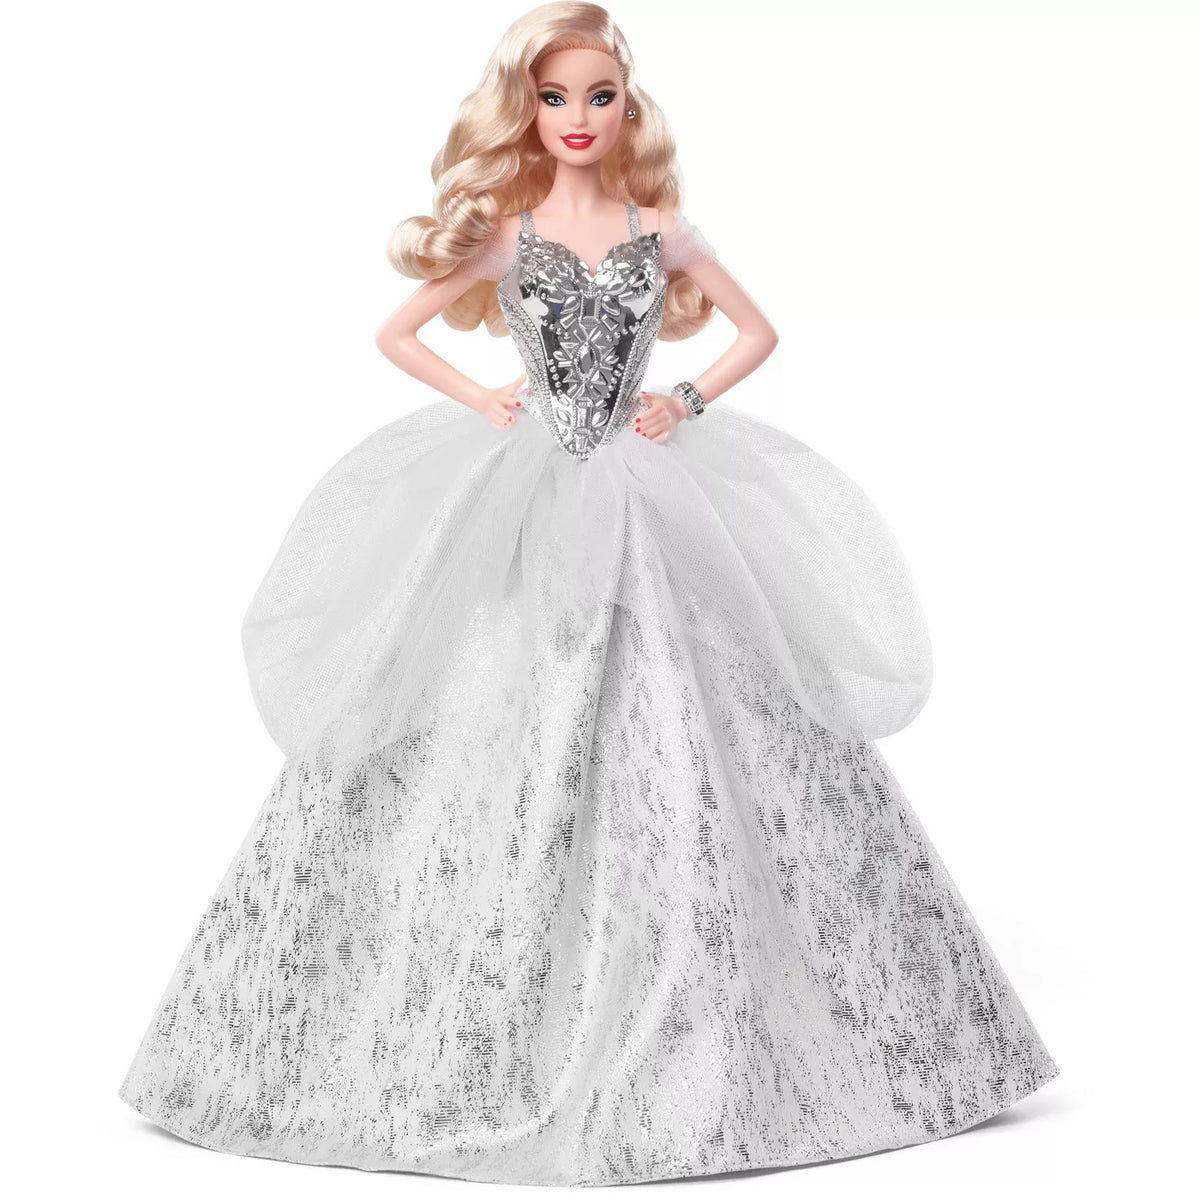 BARBIE 2021 HOLIDAY DOLL